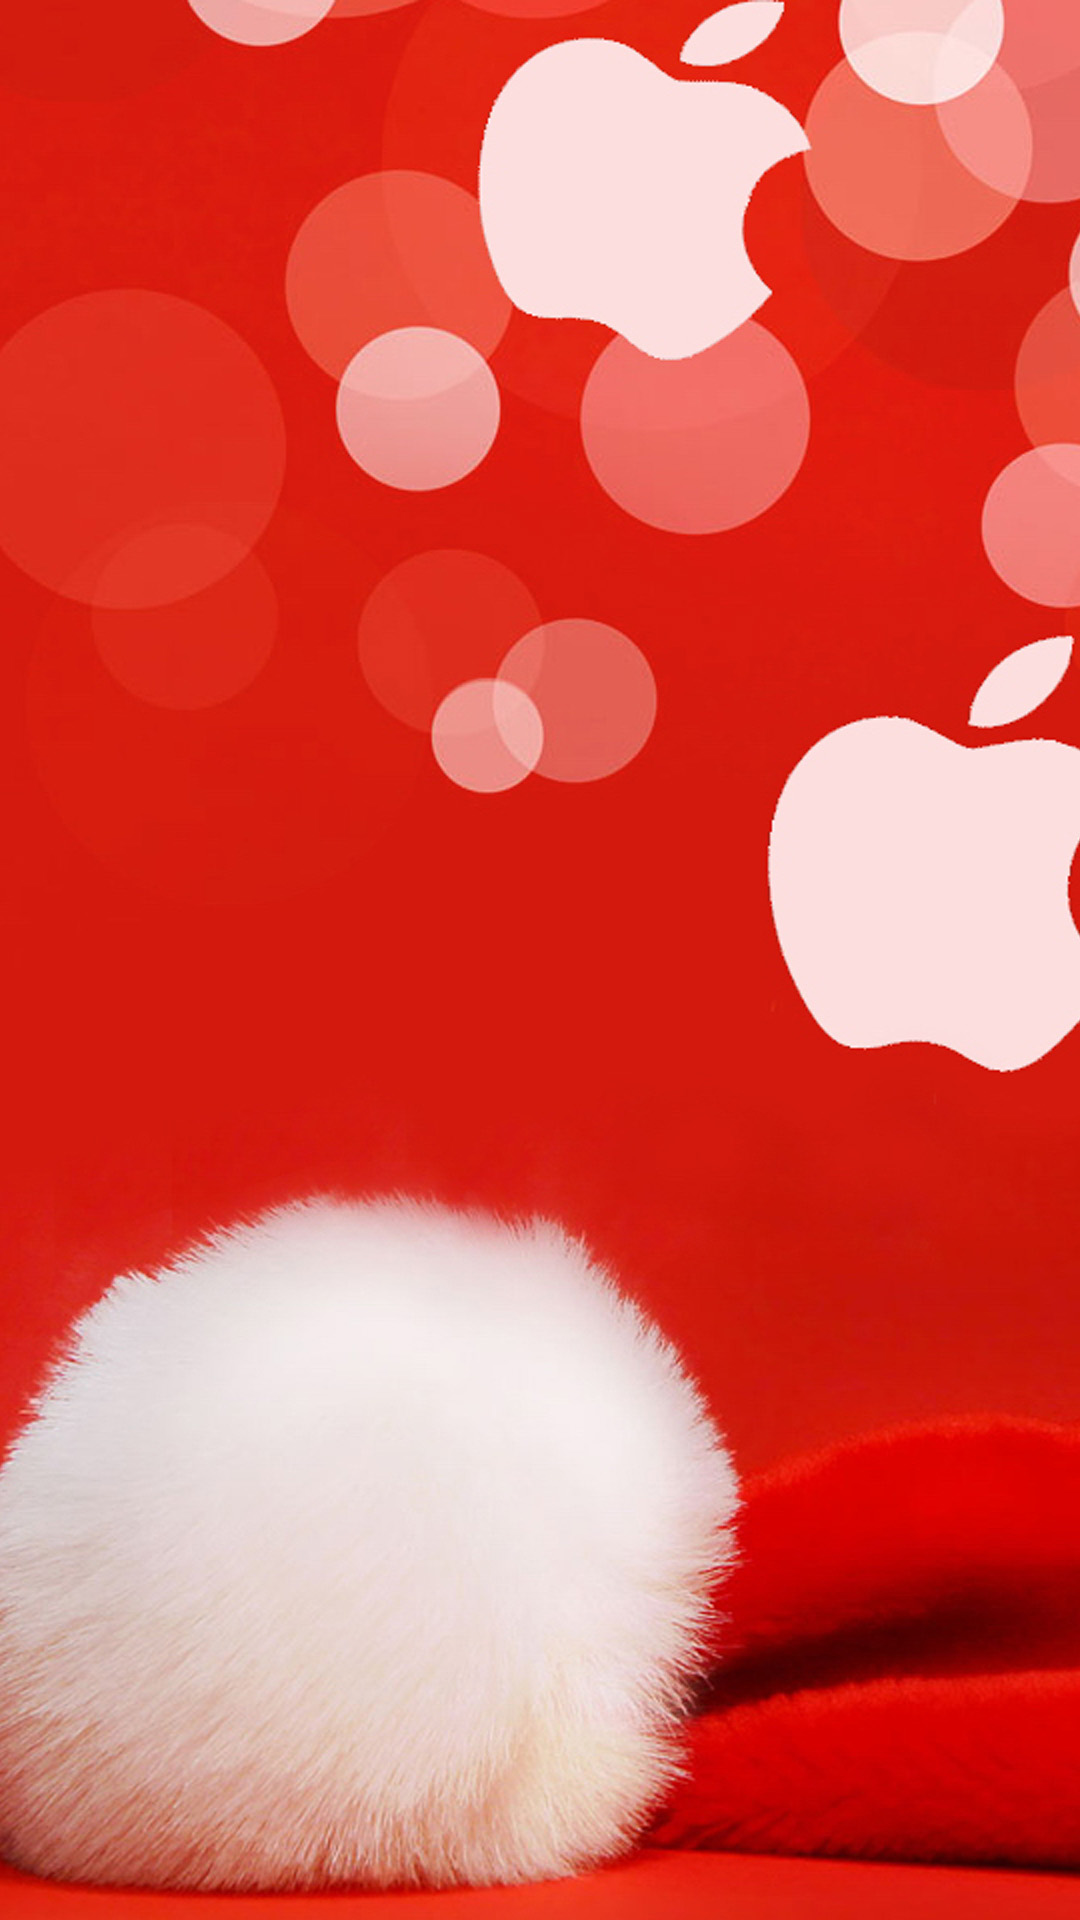 Holiday Wallpapers For Iphone 6 Plus 90, Iphone 6 Plus - Christmas Hd Wallpaper Iphone 6s Plus - HD Wallpaper 